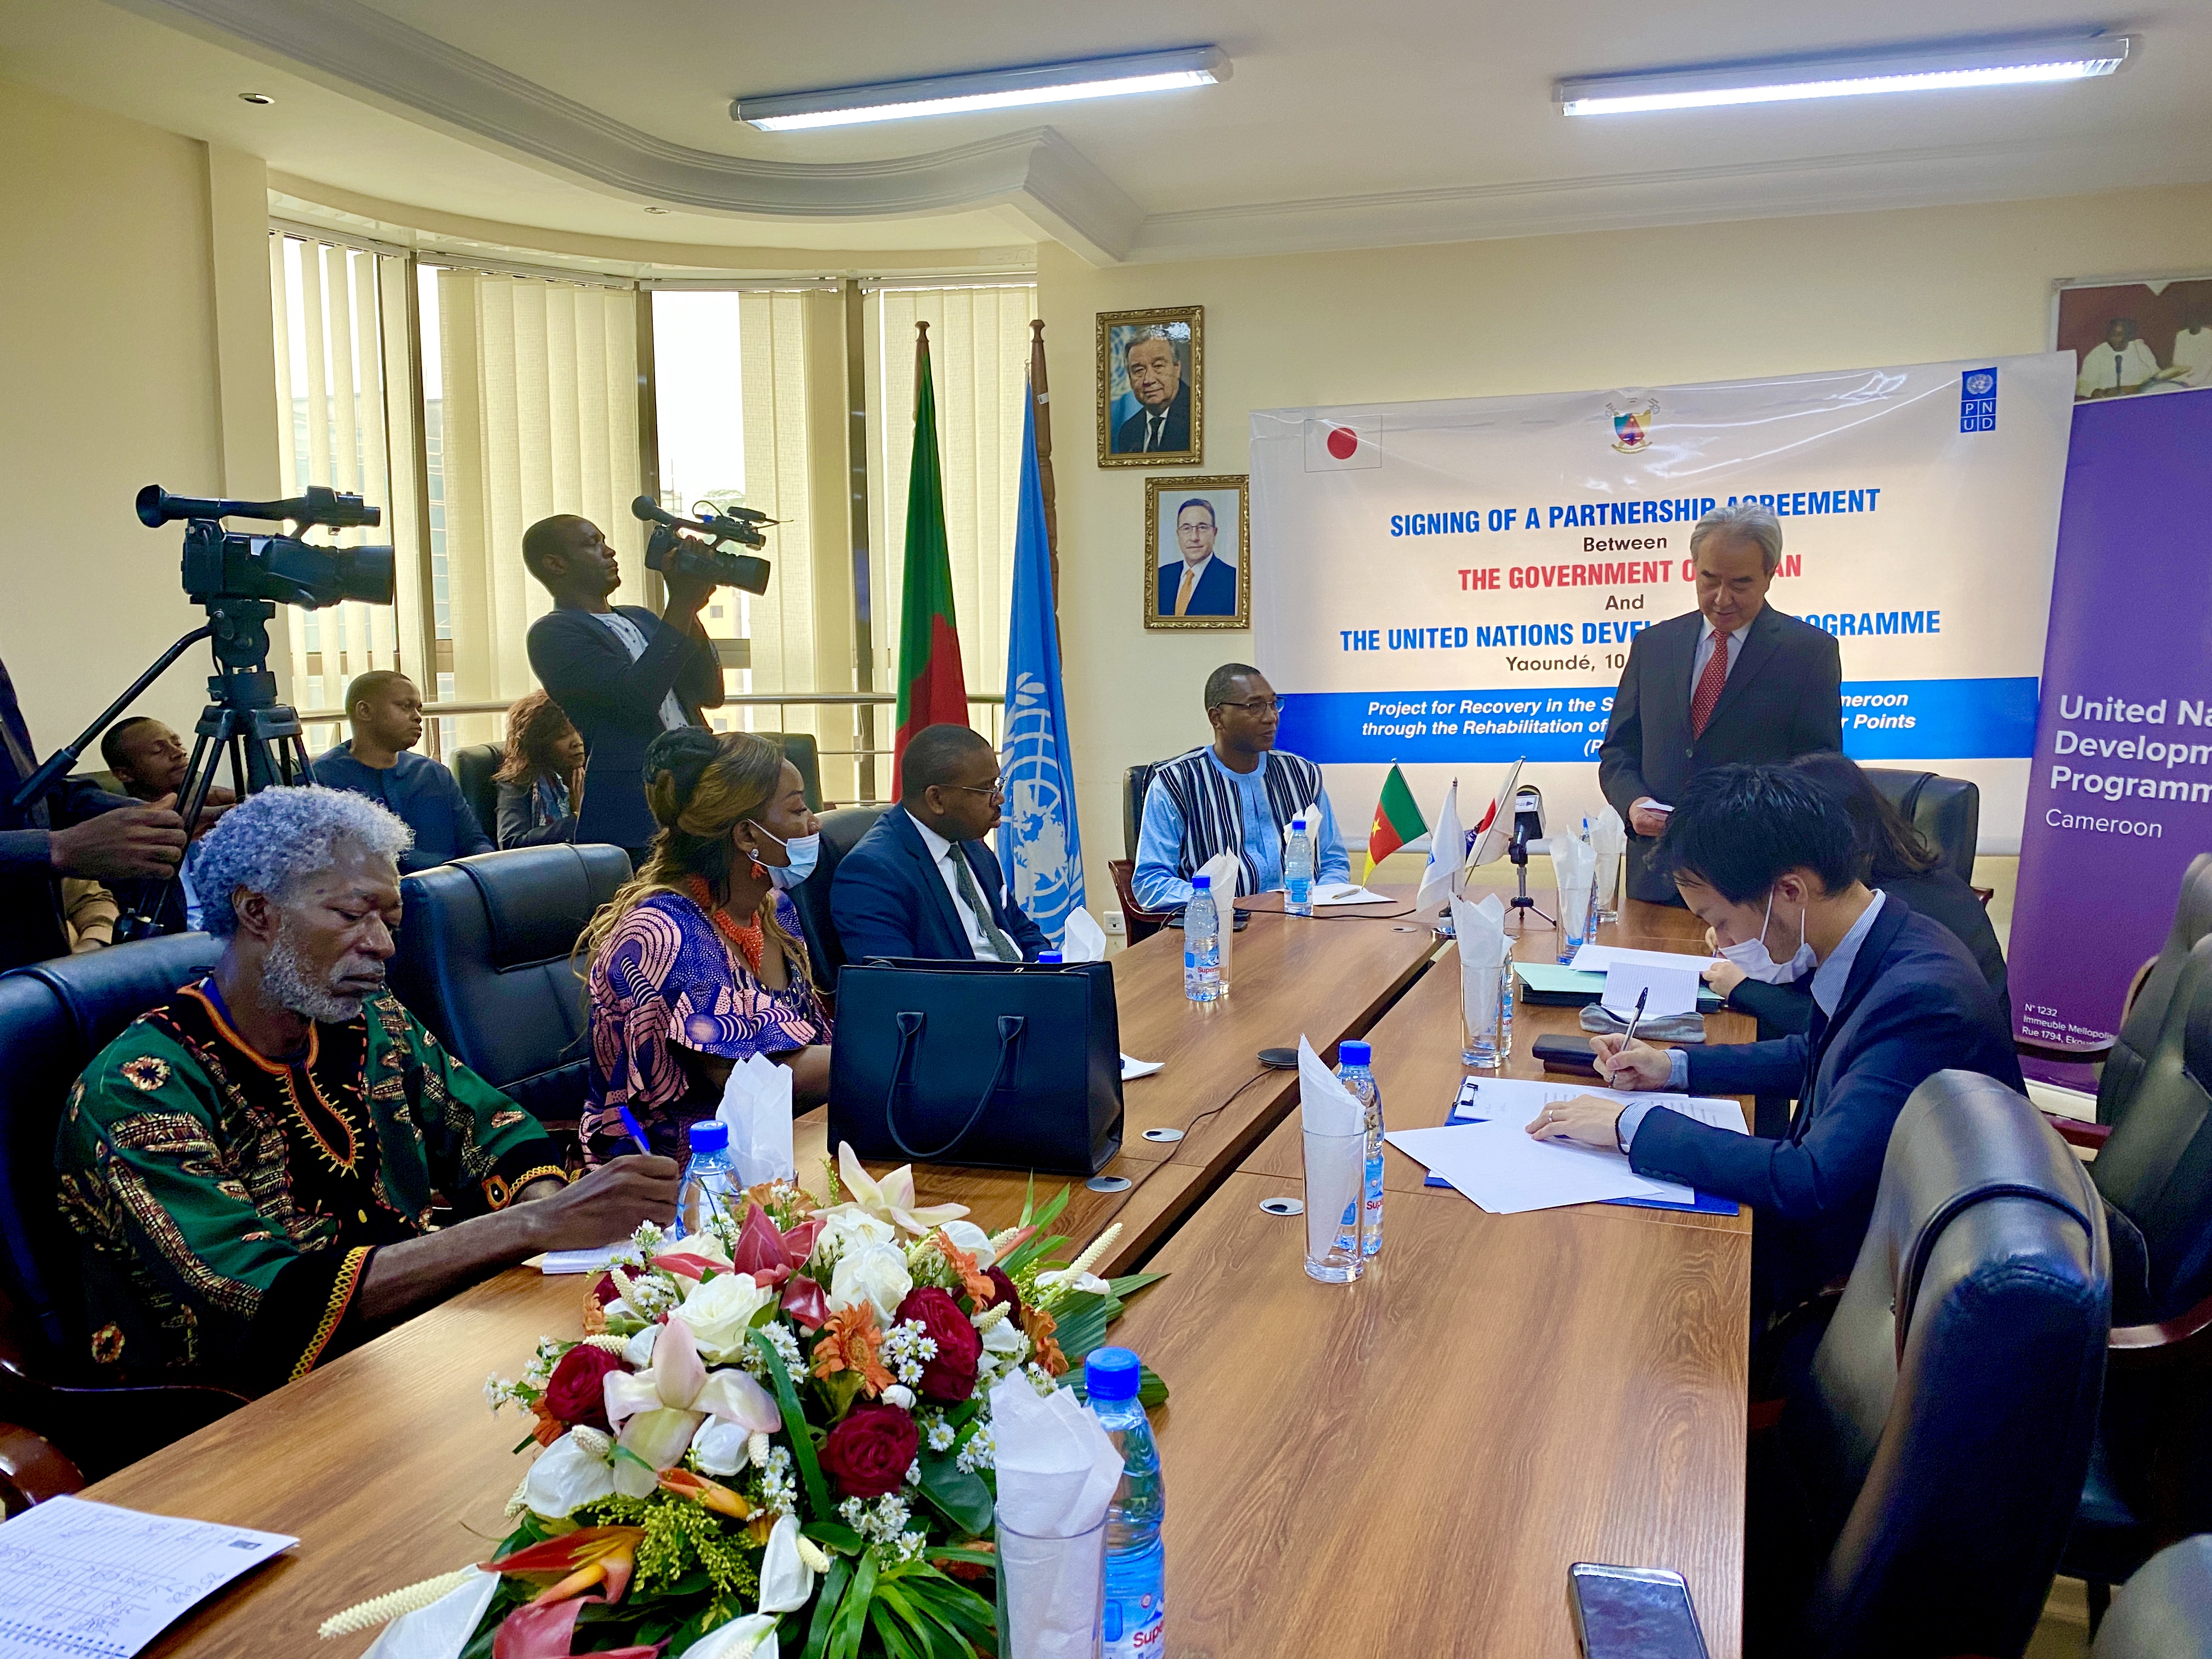 A cross-section of officials present during the ceremony, including representatives of the Ministry of External Relations and the Ministry of Economy, Planning, and Regional Development